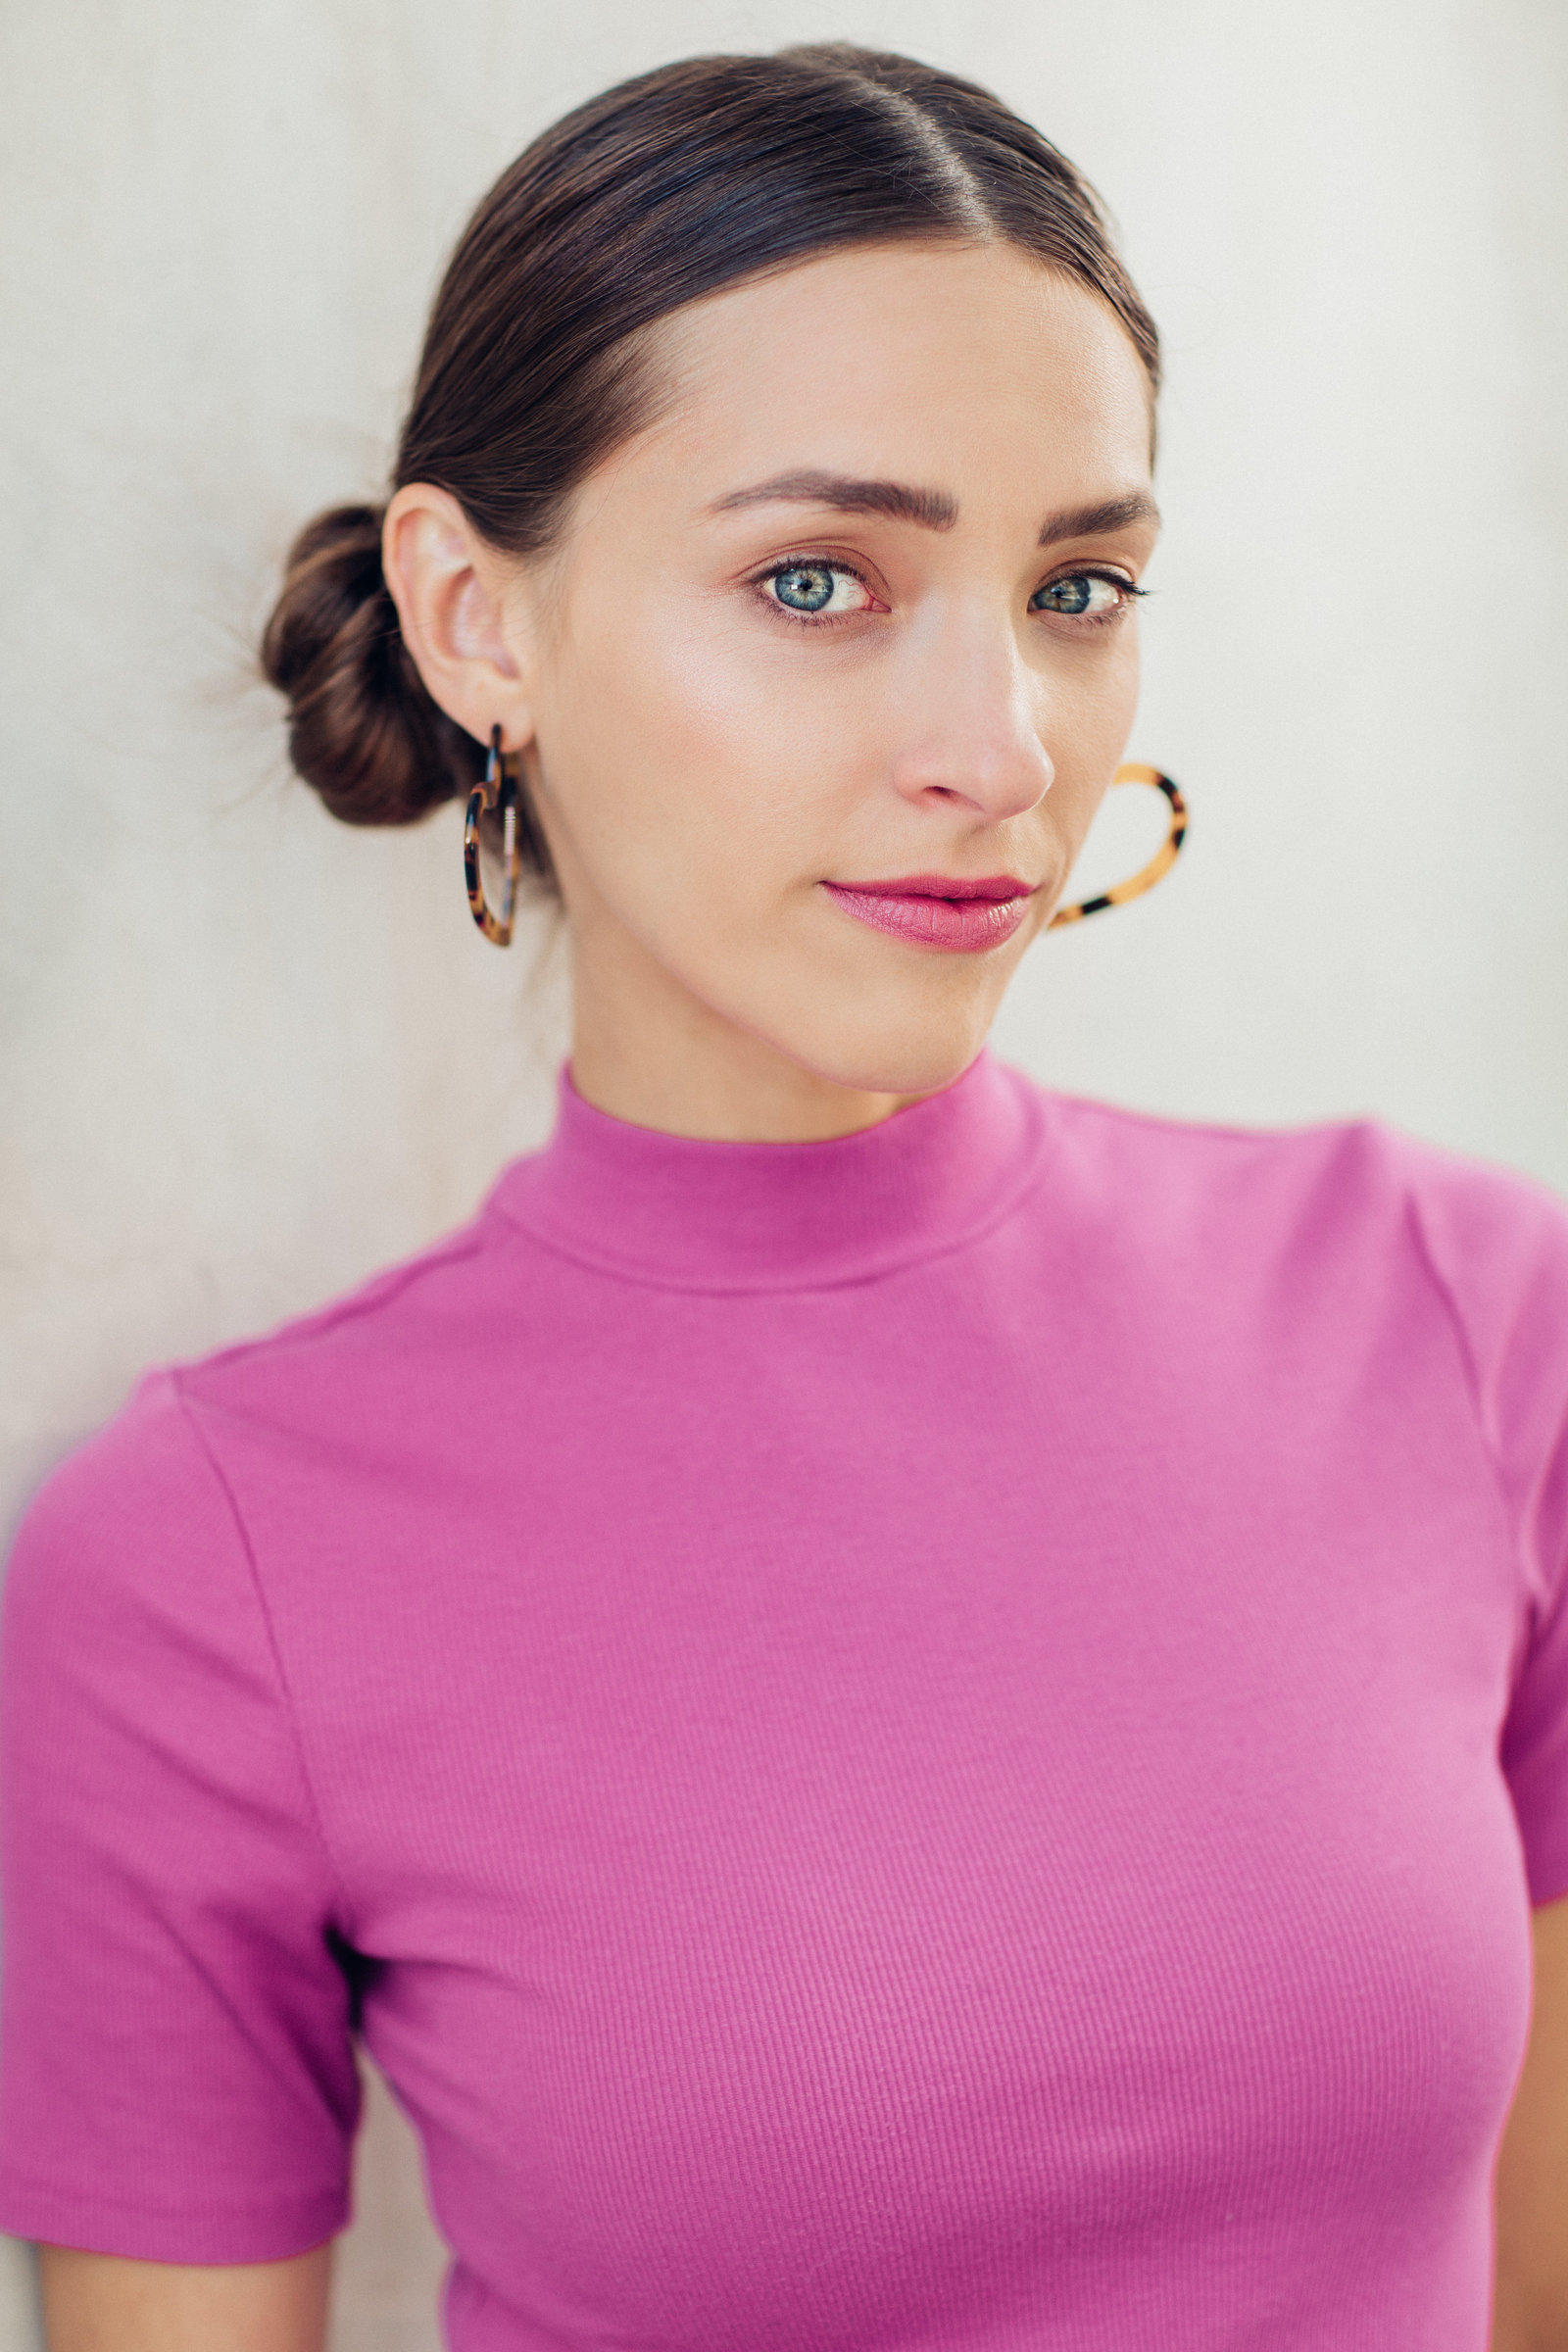 Headshot Photo Of Young Woman In Pink Turtle Neck Shirt